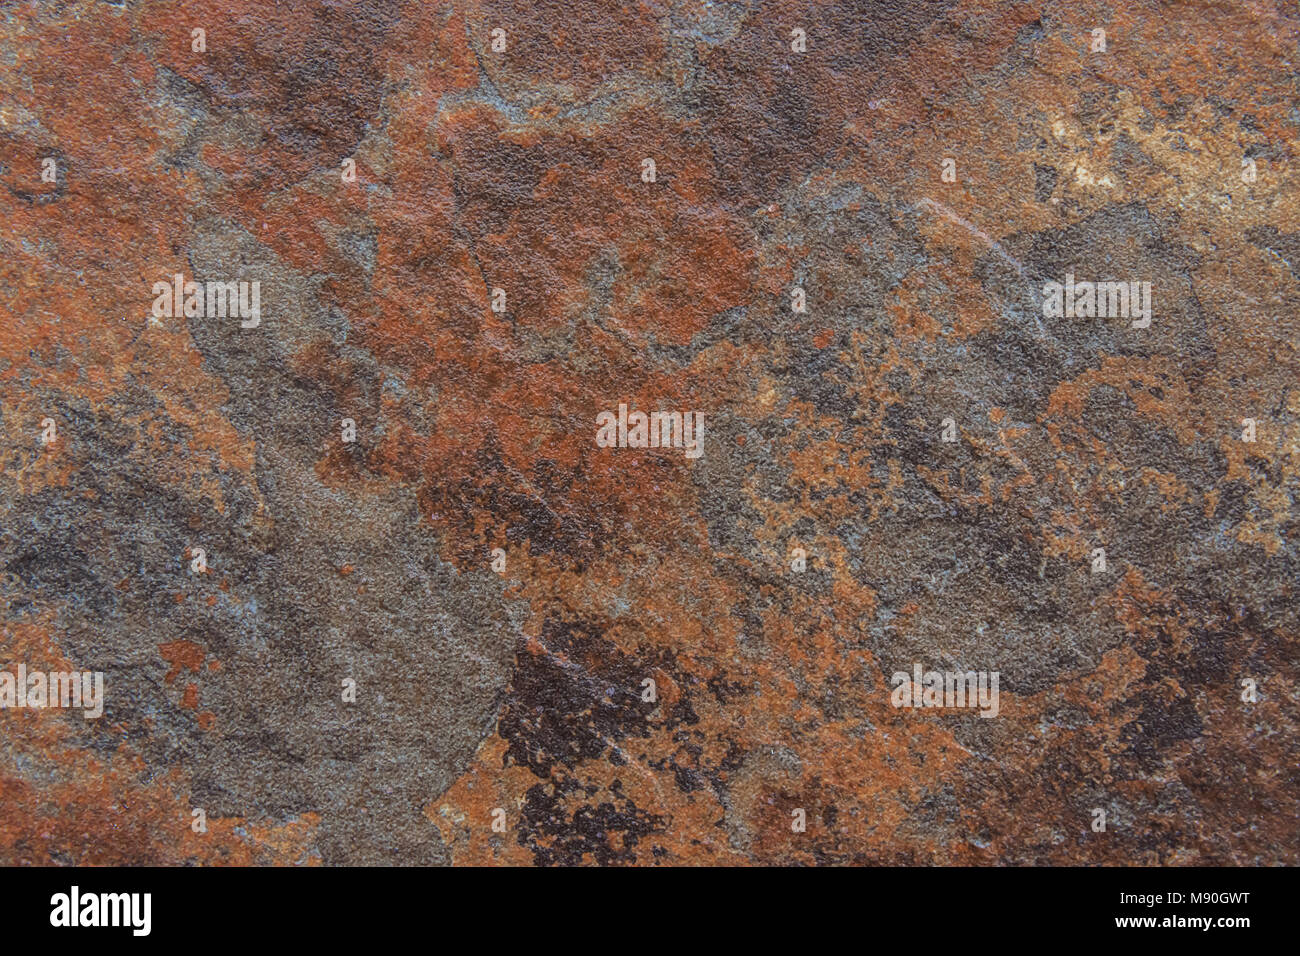 Old Distressed Brown Terracotta Copper Rusty Stone Background with Rough Texture Multicolored Inclusions. Stained Gradient Coarse Grainy Surface. Wall Stock Photo